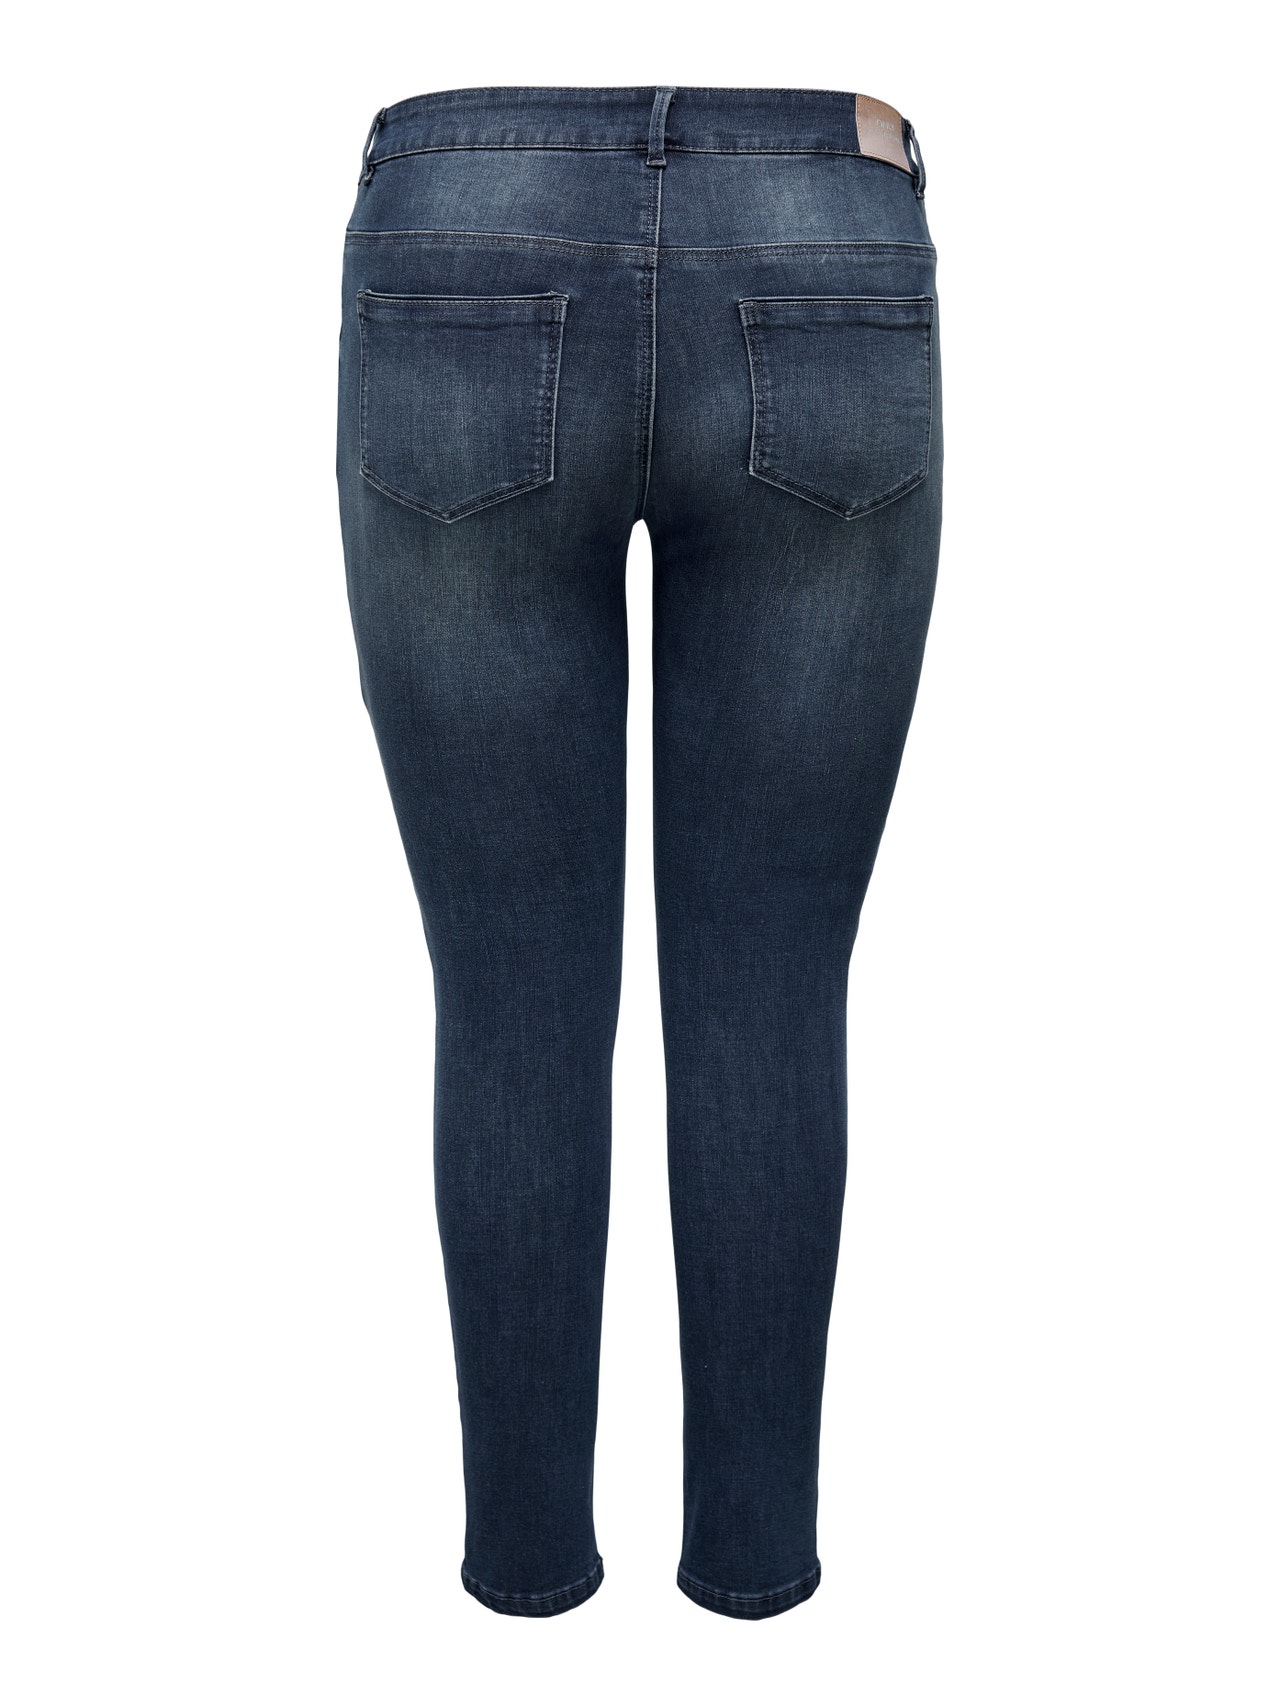 Curvy CARSally reg | jeans with ONLY® fit 30% Skinny discount